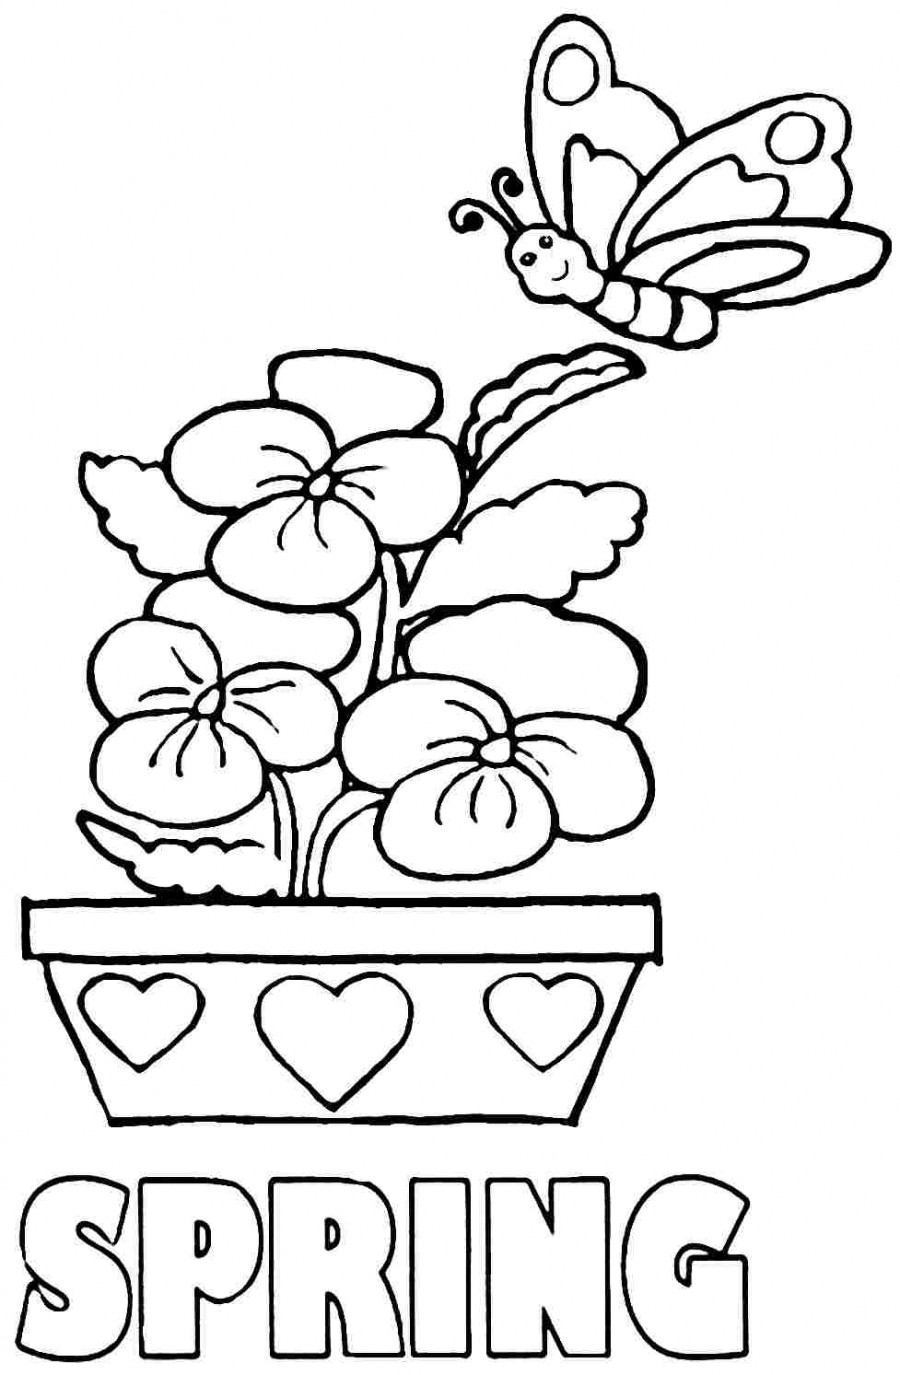 Spring Coloring Pages For Toddlers Coloring Pages Remarkable Free Printablering Pages For